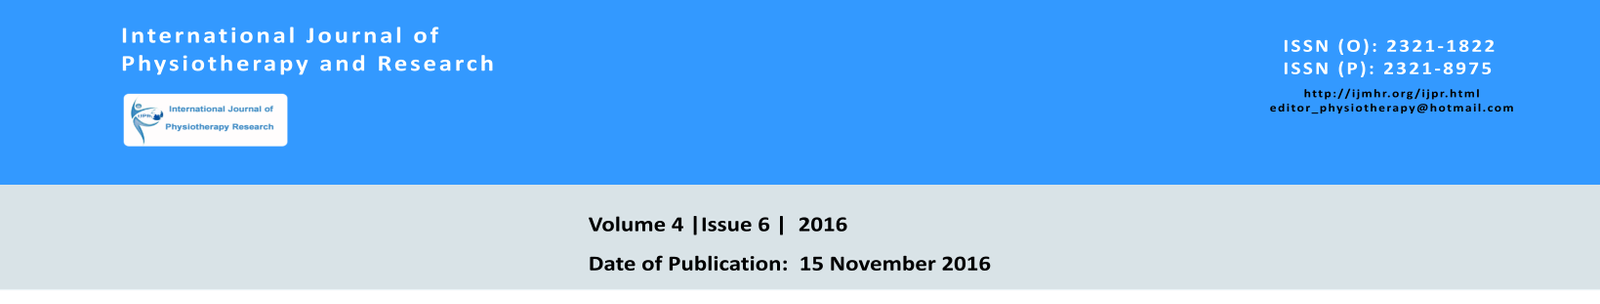 International Journal of Physiotherapy and Research ISSN (O): 2321-1822  ISSN (P): 2321-8975 Volume 4 |Issue 6 |  2016 Date of Publication:  15 November 2016 http://ijmhr.org/ijpr.html editor_physiotherapy@hotmail.com